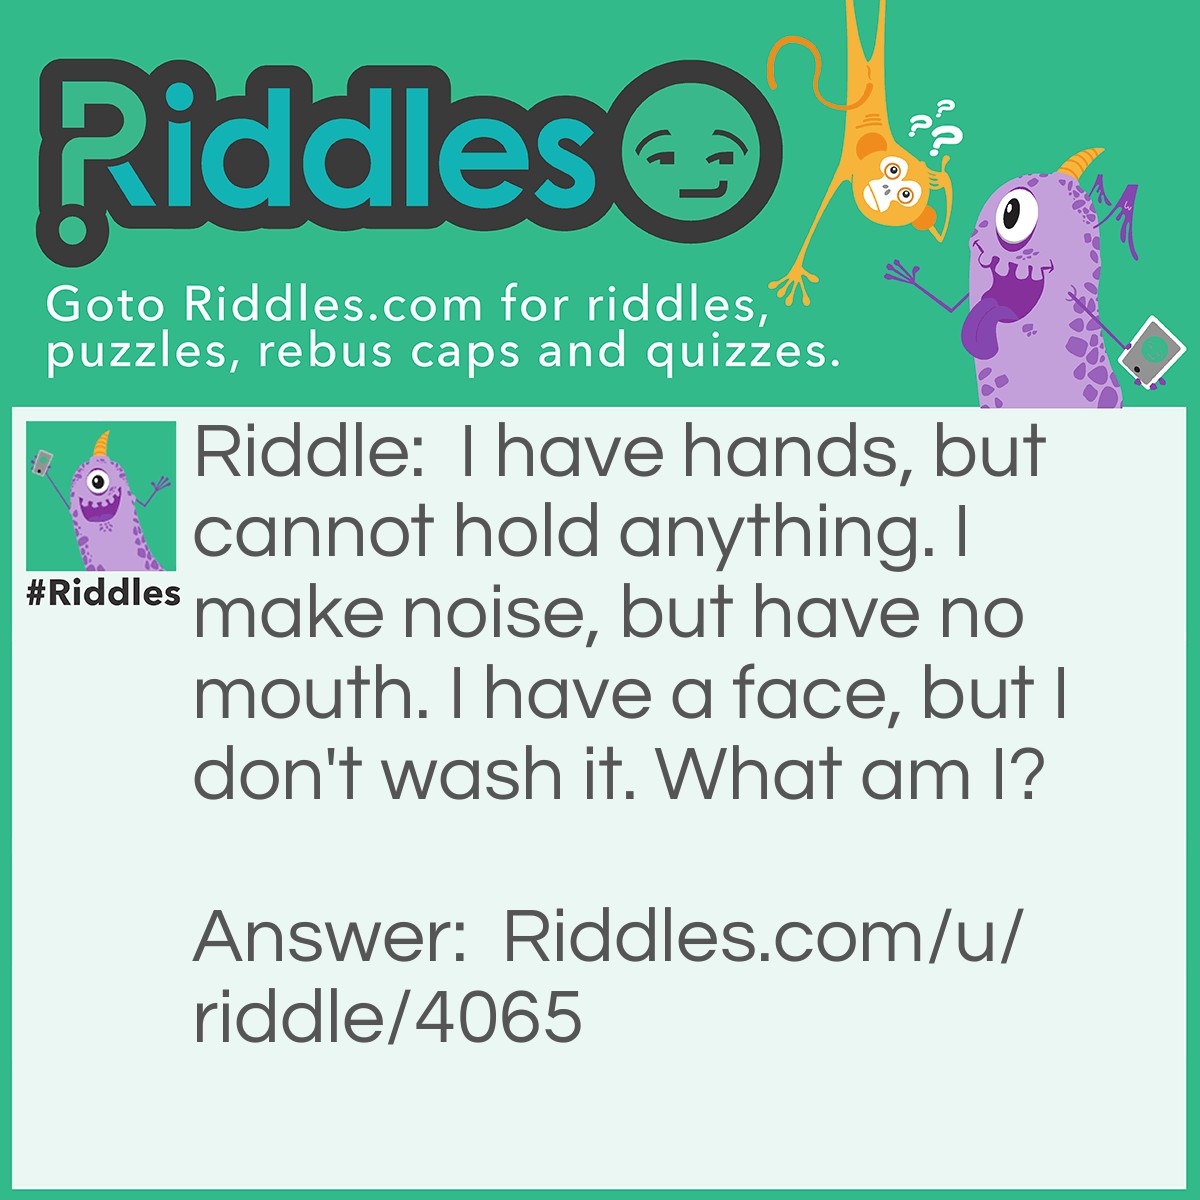 Riddle: I have hands, but cannot hold anything. I make noise, but have no mouth. I have a face, but I don't wash it. What am I? Answer: Clock